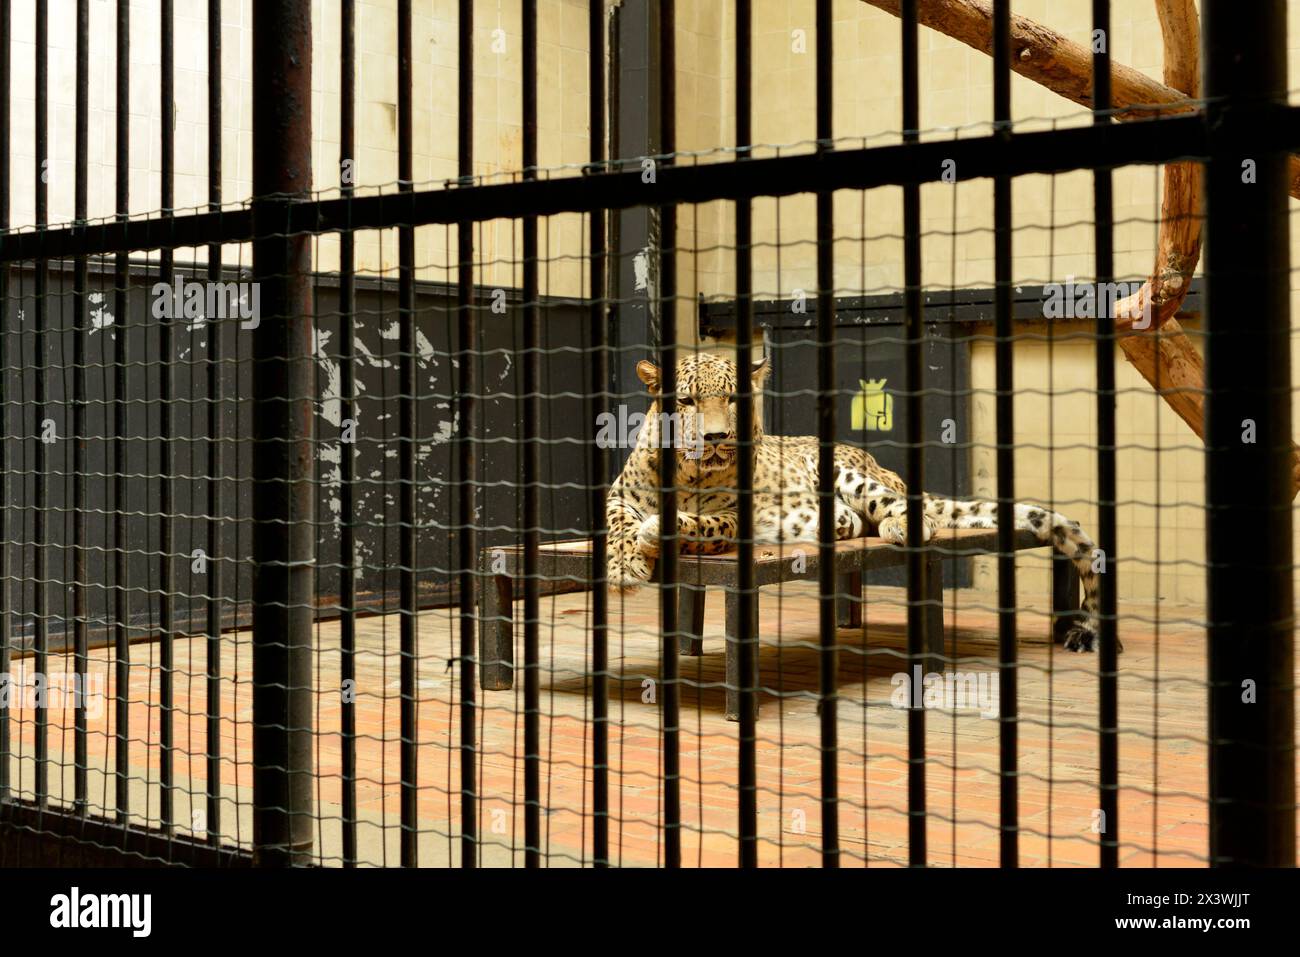 Jaguar Panthera onca near threatened species of cat in captivity in its cage behind bars in Sofia Zoo, Sofia Bulgaria, Eastern Europe, Balkans, EU Stock Photo